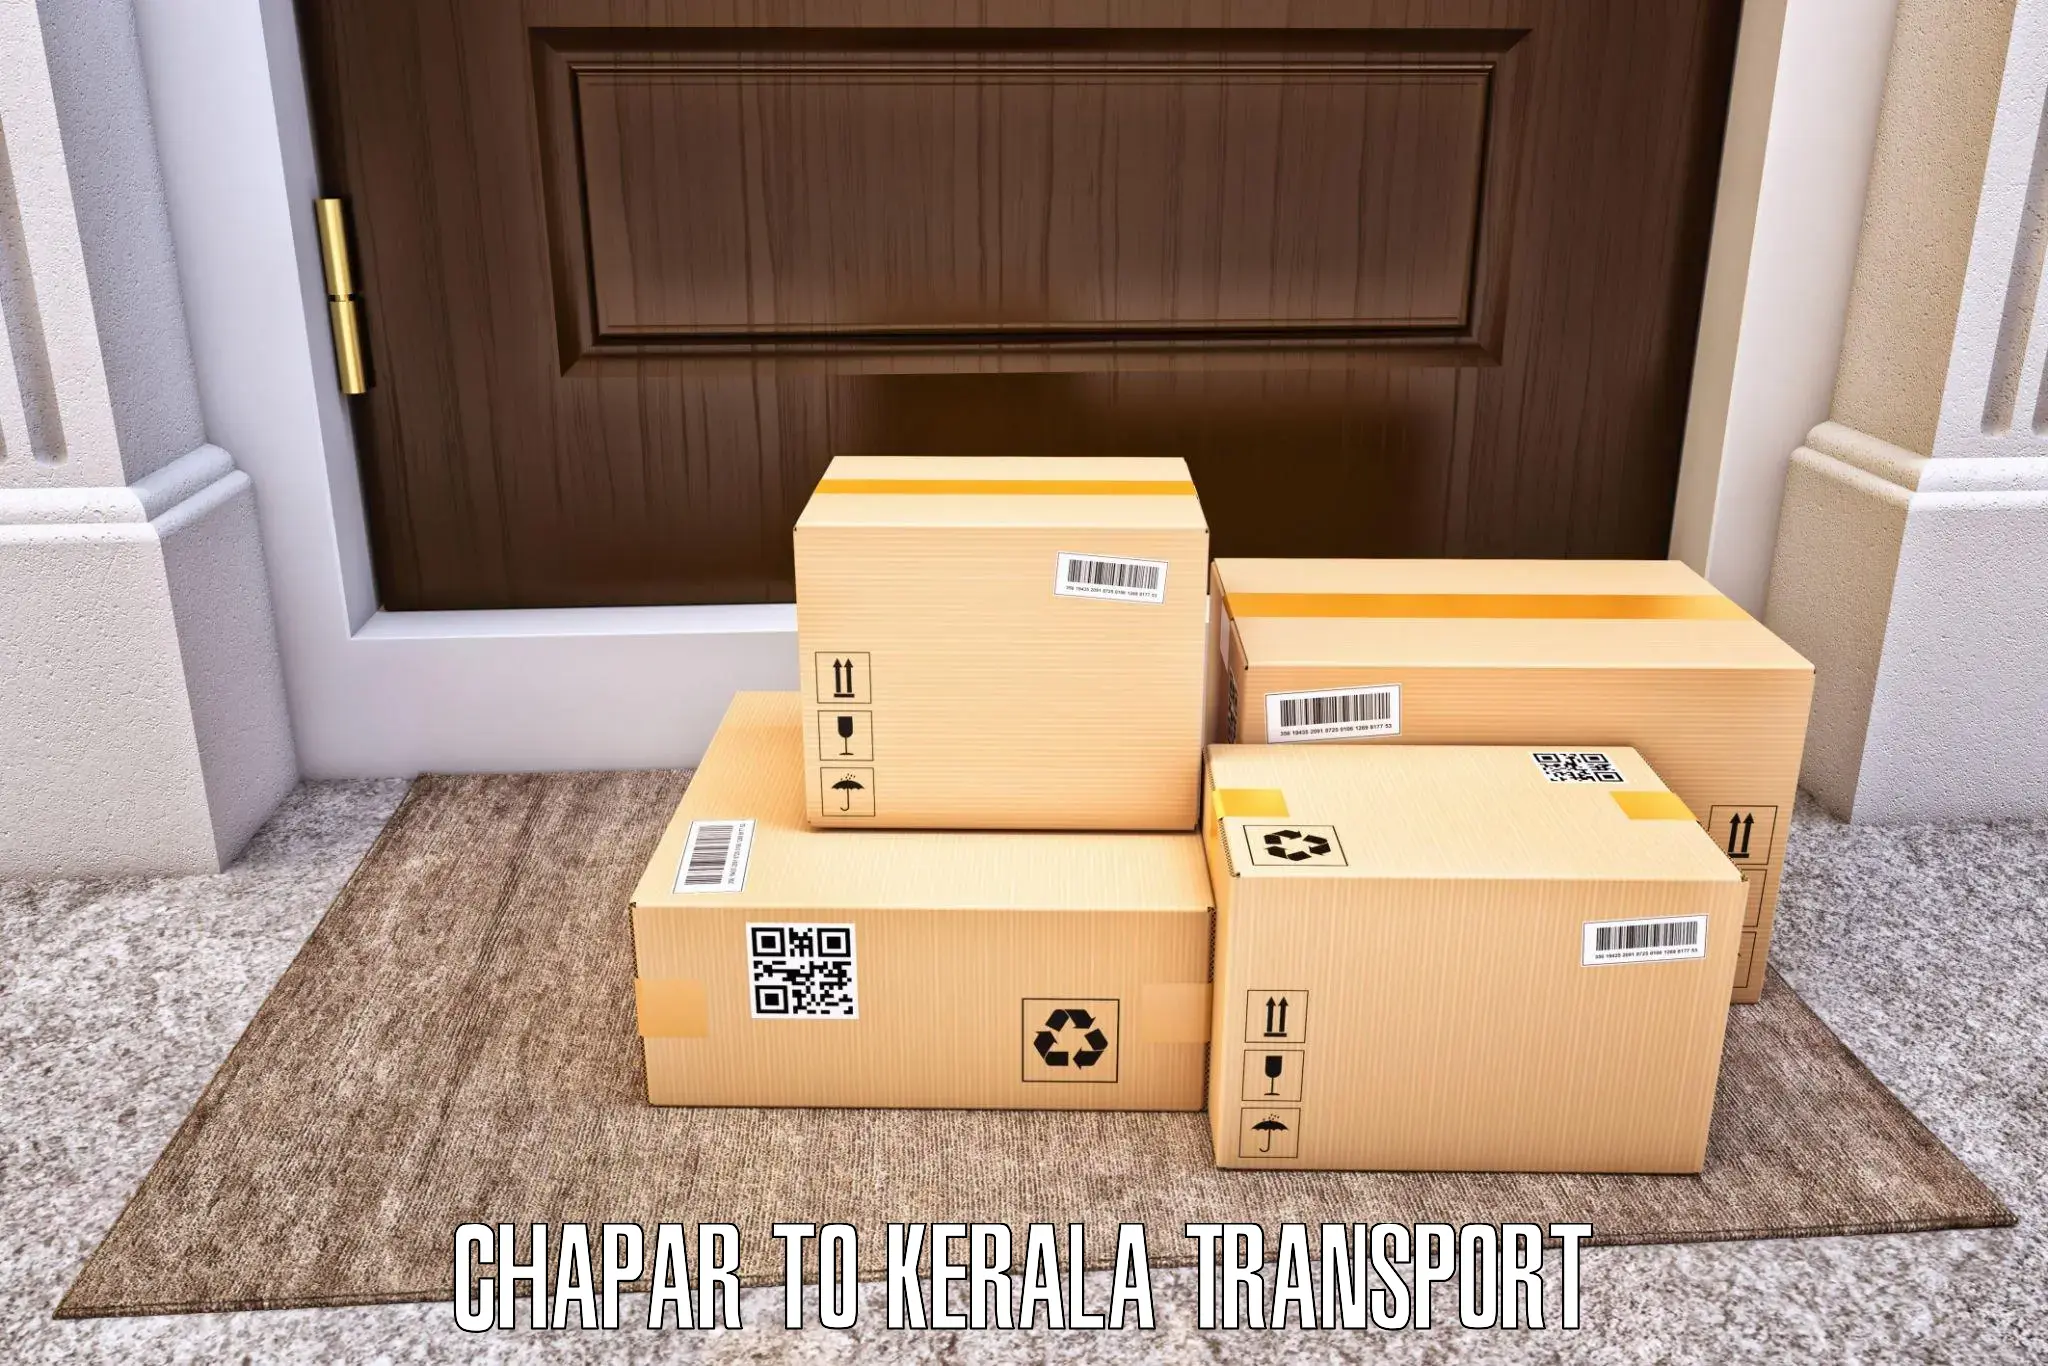 Online transport booking Chapar to Chalakudy